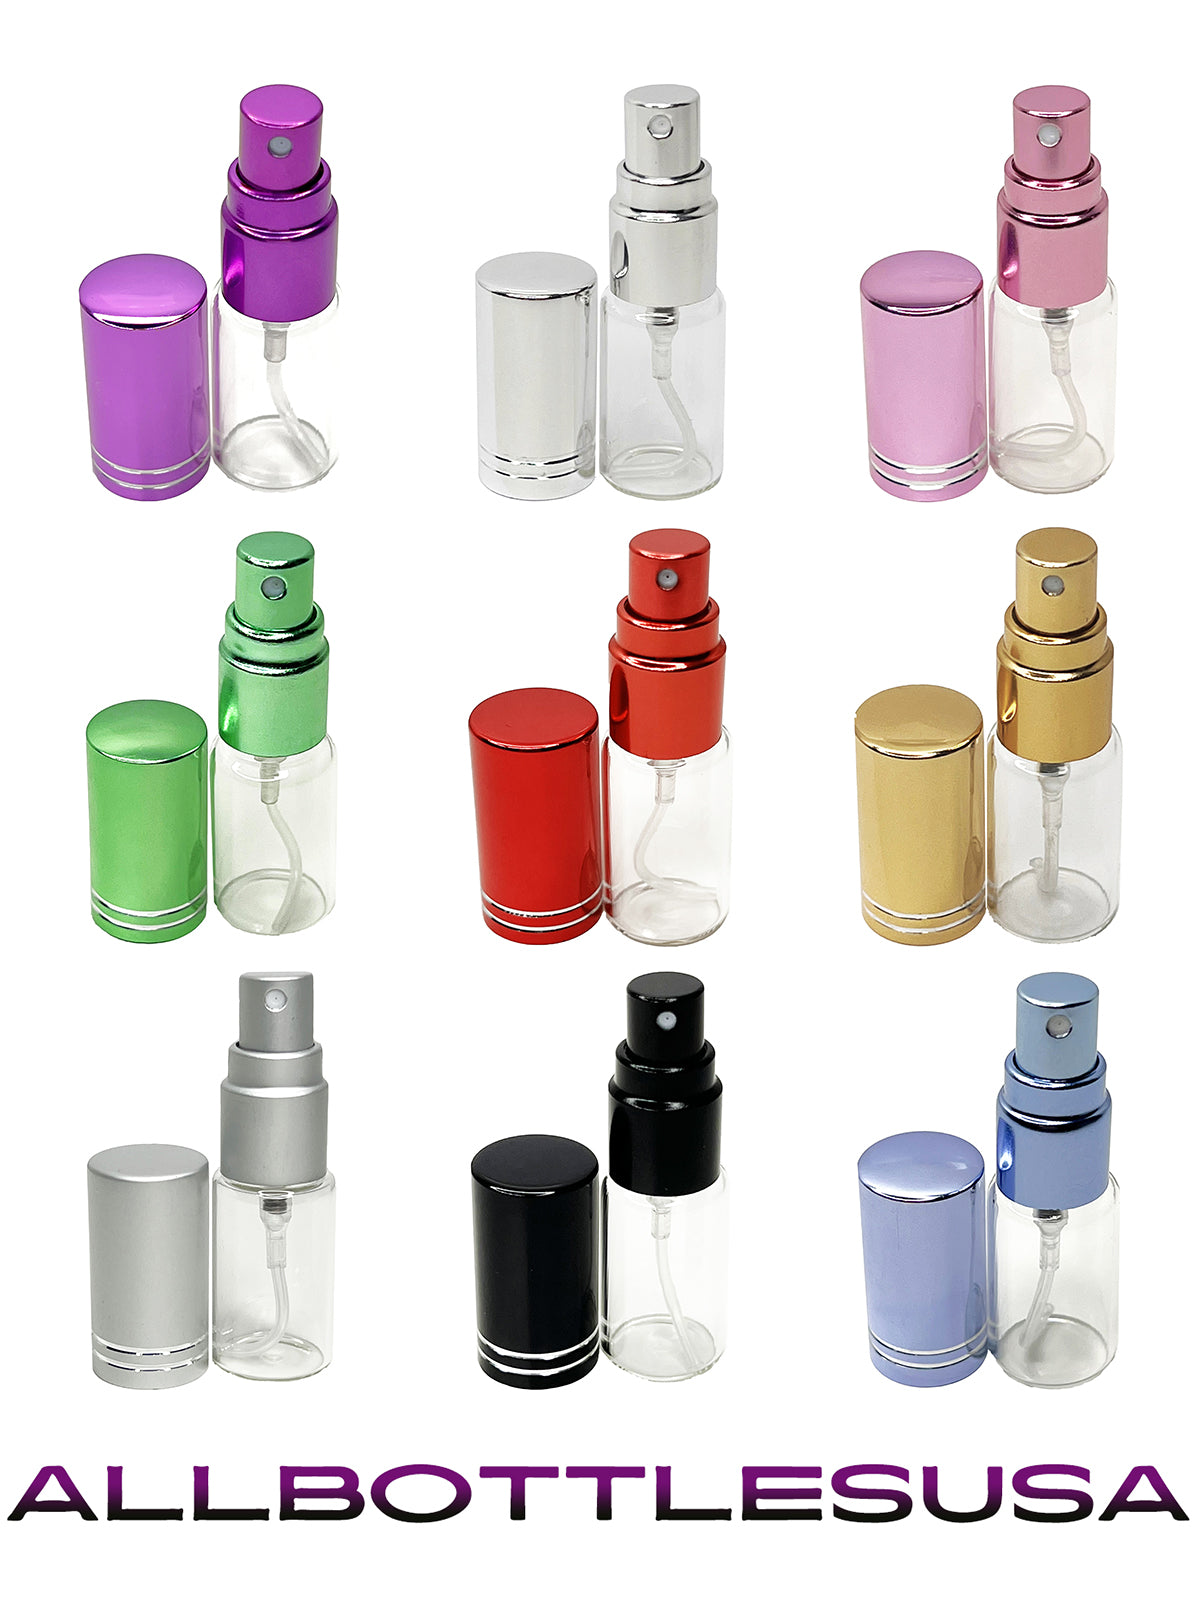 100ml Perfume Bottle Glass Square Grids Portable Clear Travel Refillable  Perfume Glass Empty Bottle Perfume Atomizer